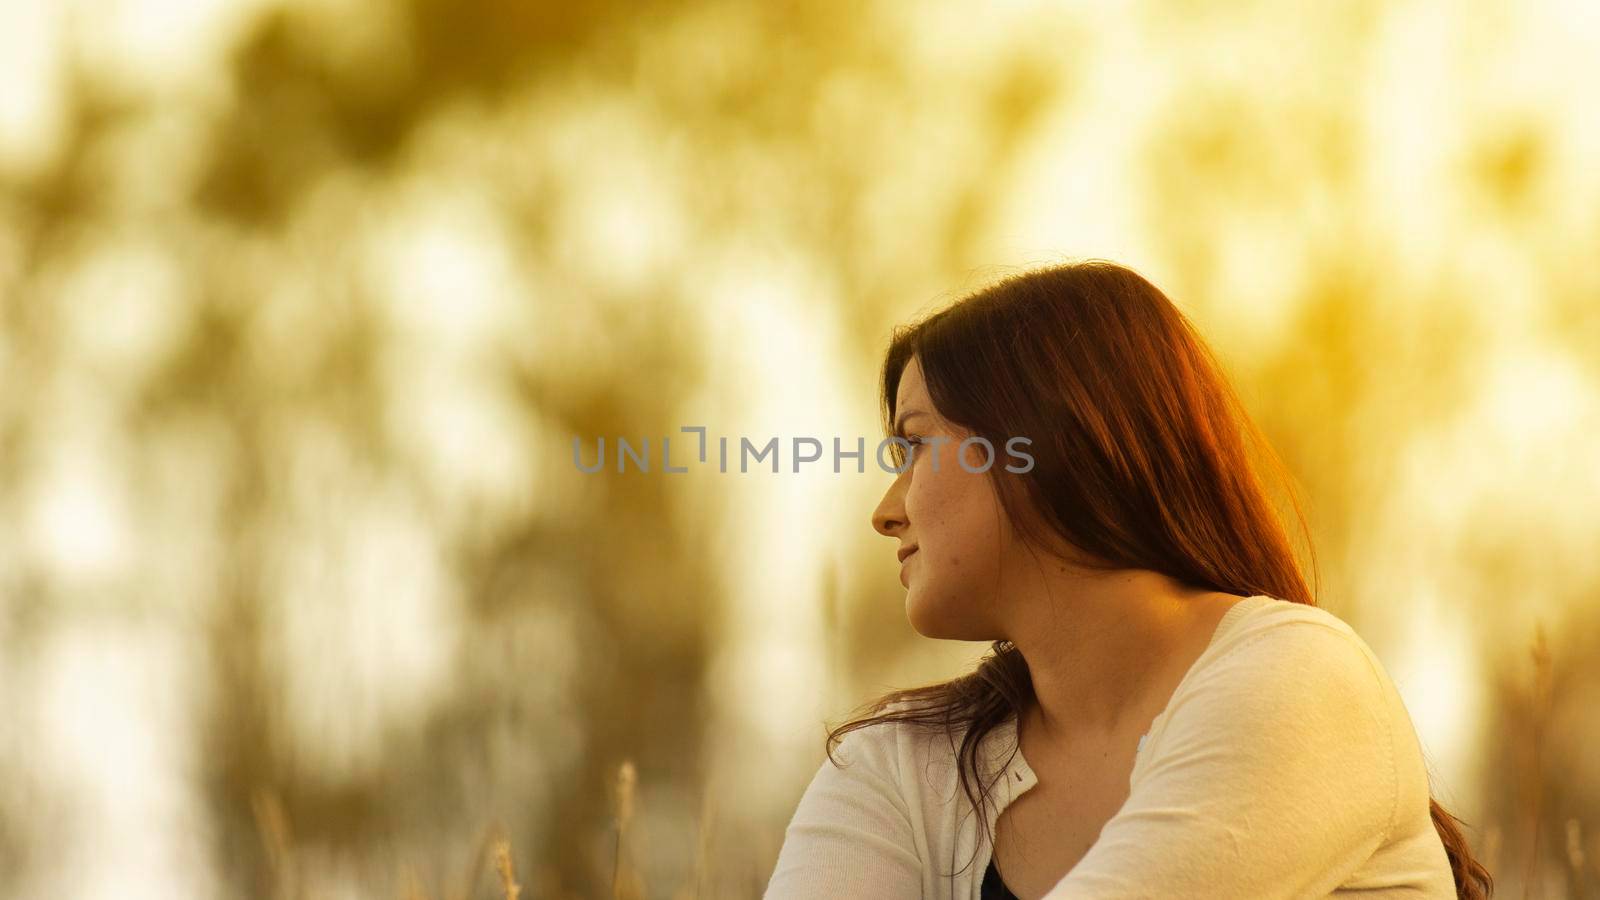 Portrait of beautiful Hispanic young woman with long hair looking to the right against a background of unfocused trees during sunset with copy space